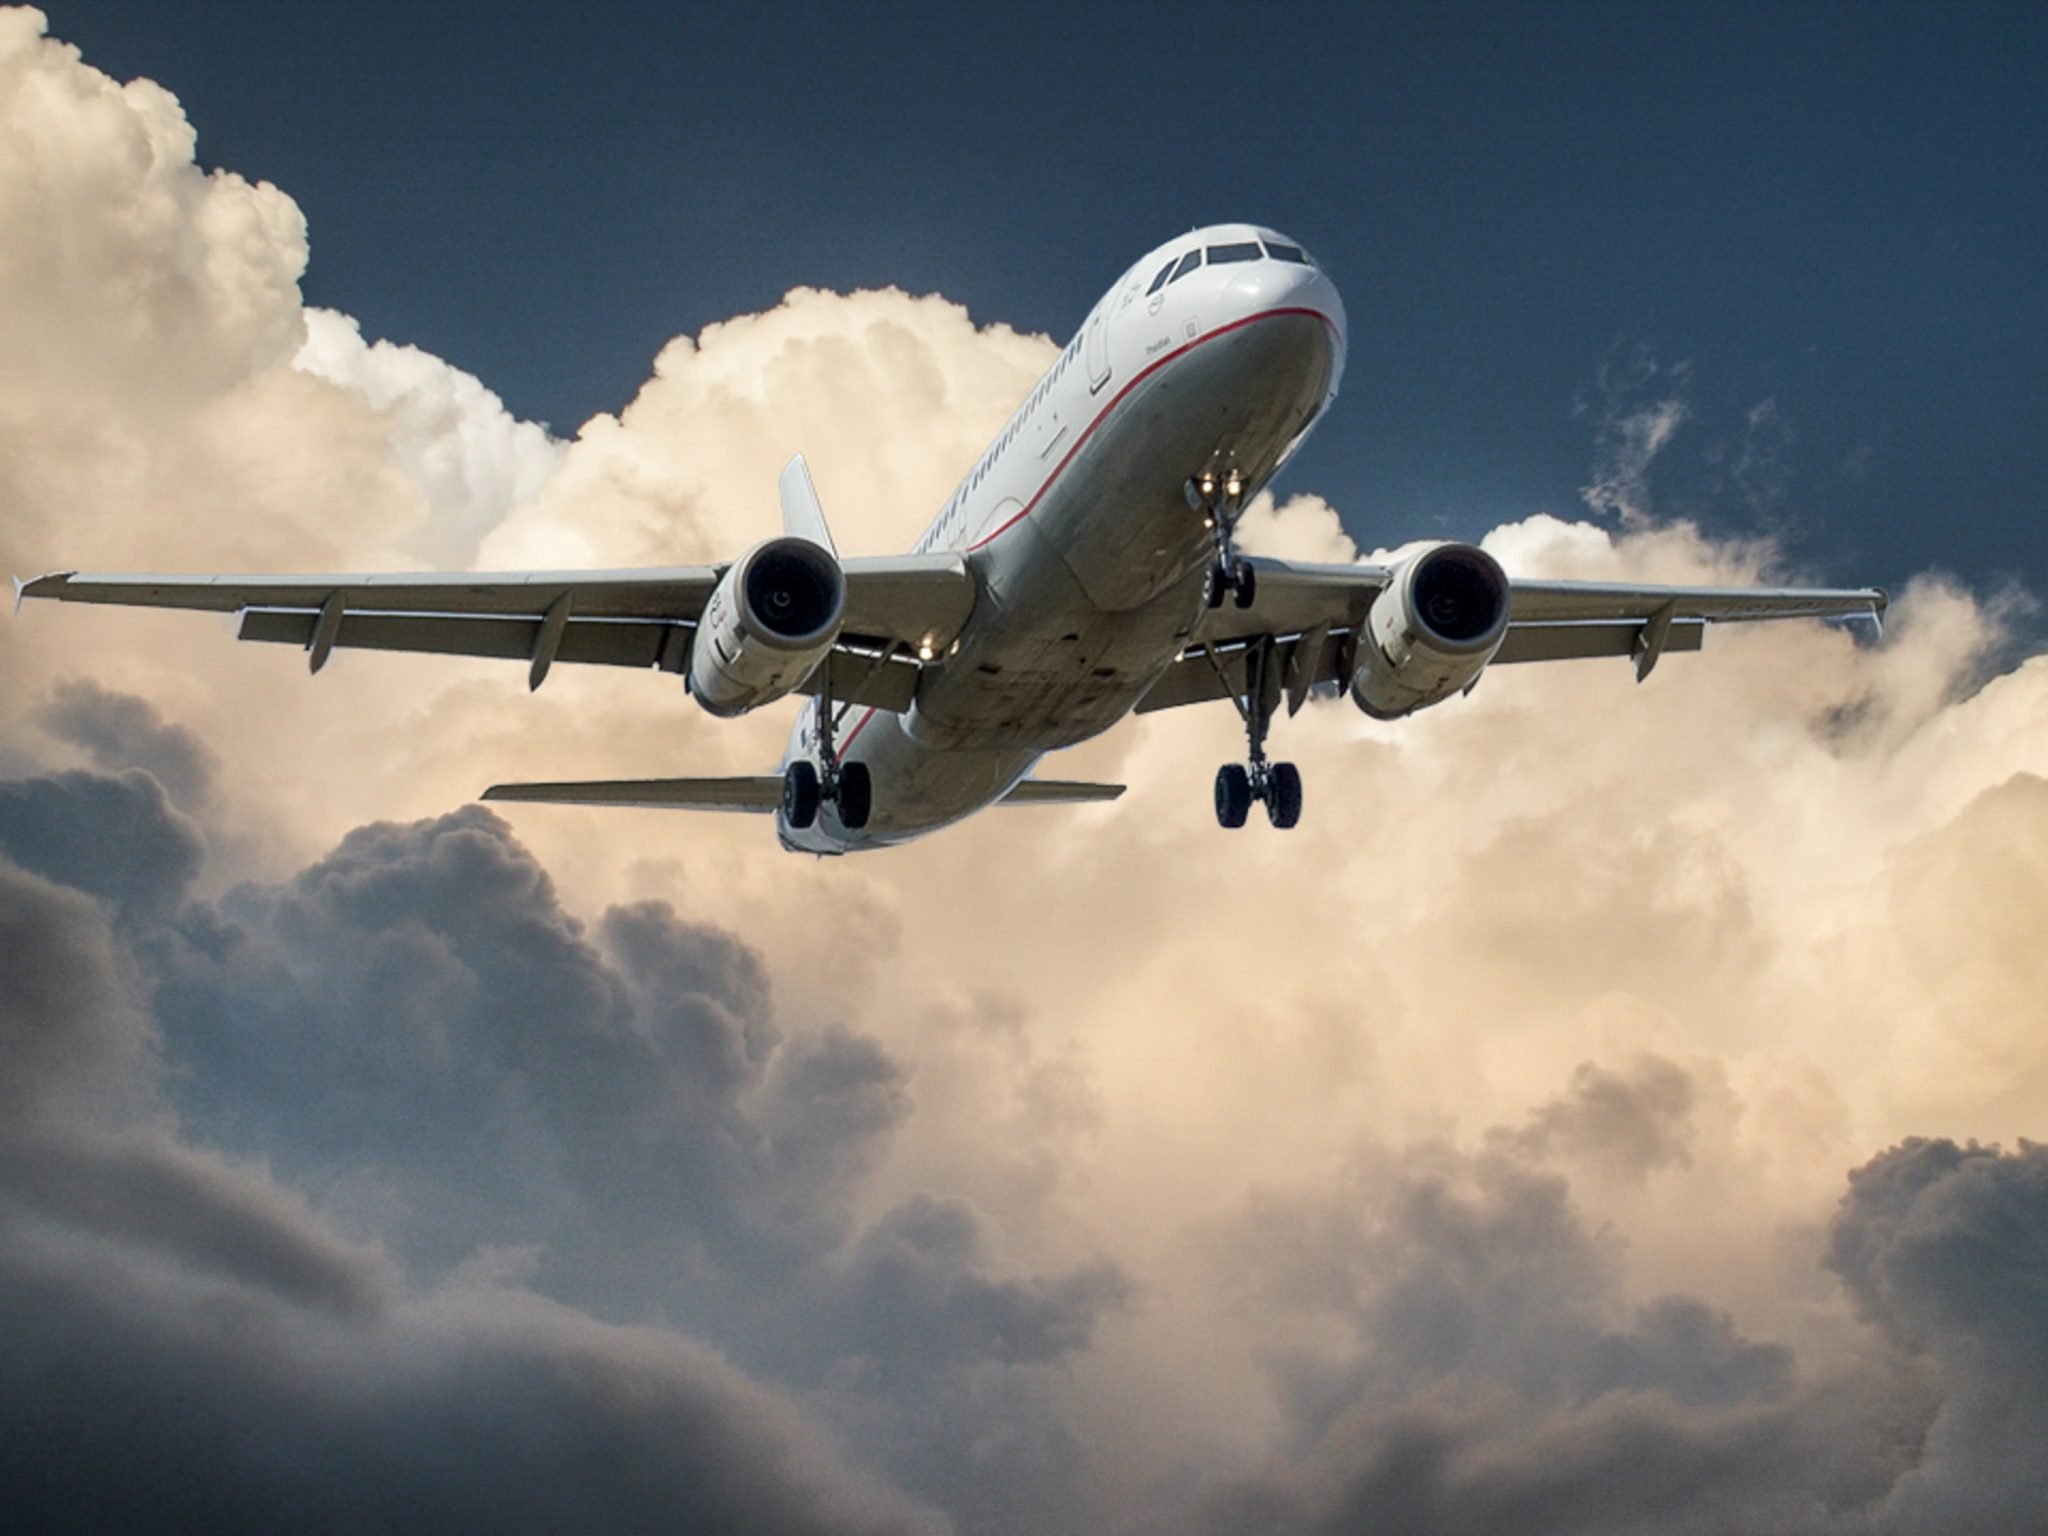 7 Easy Tips for Getting the Best Price on Airline Tickets